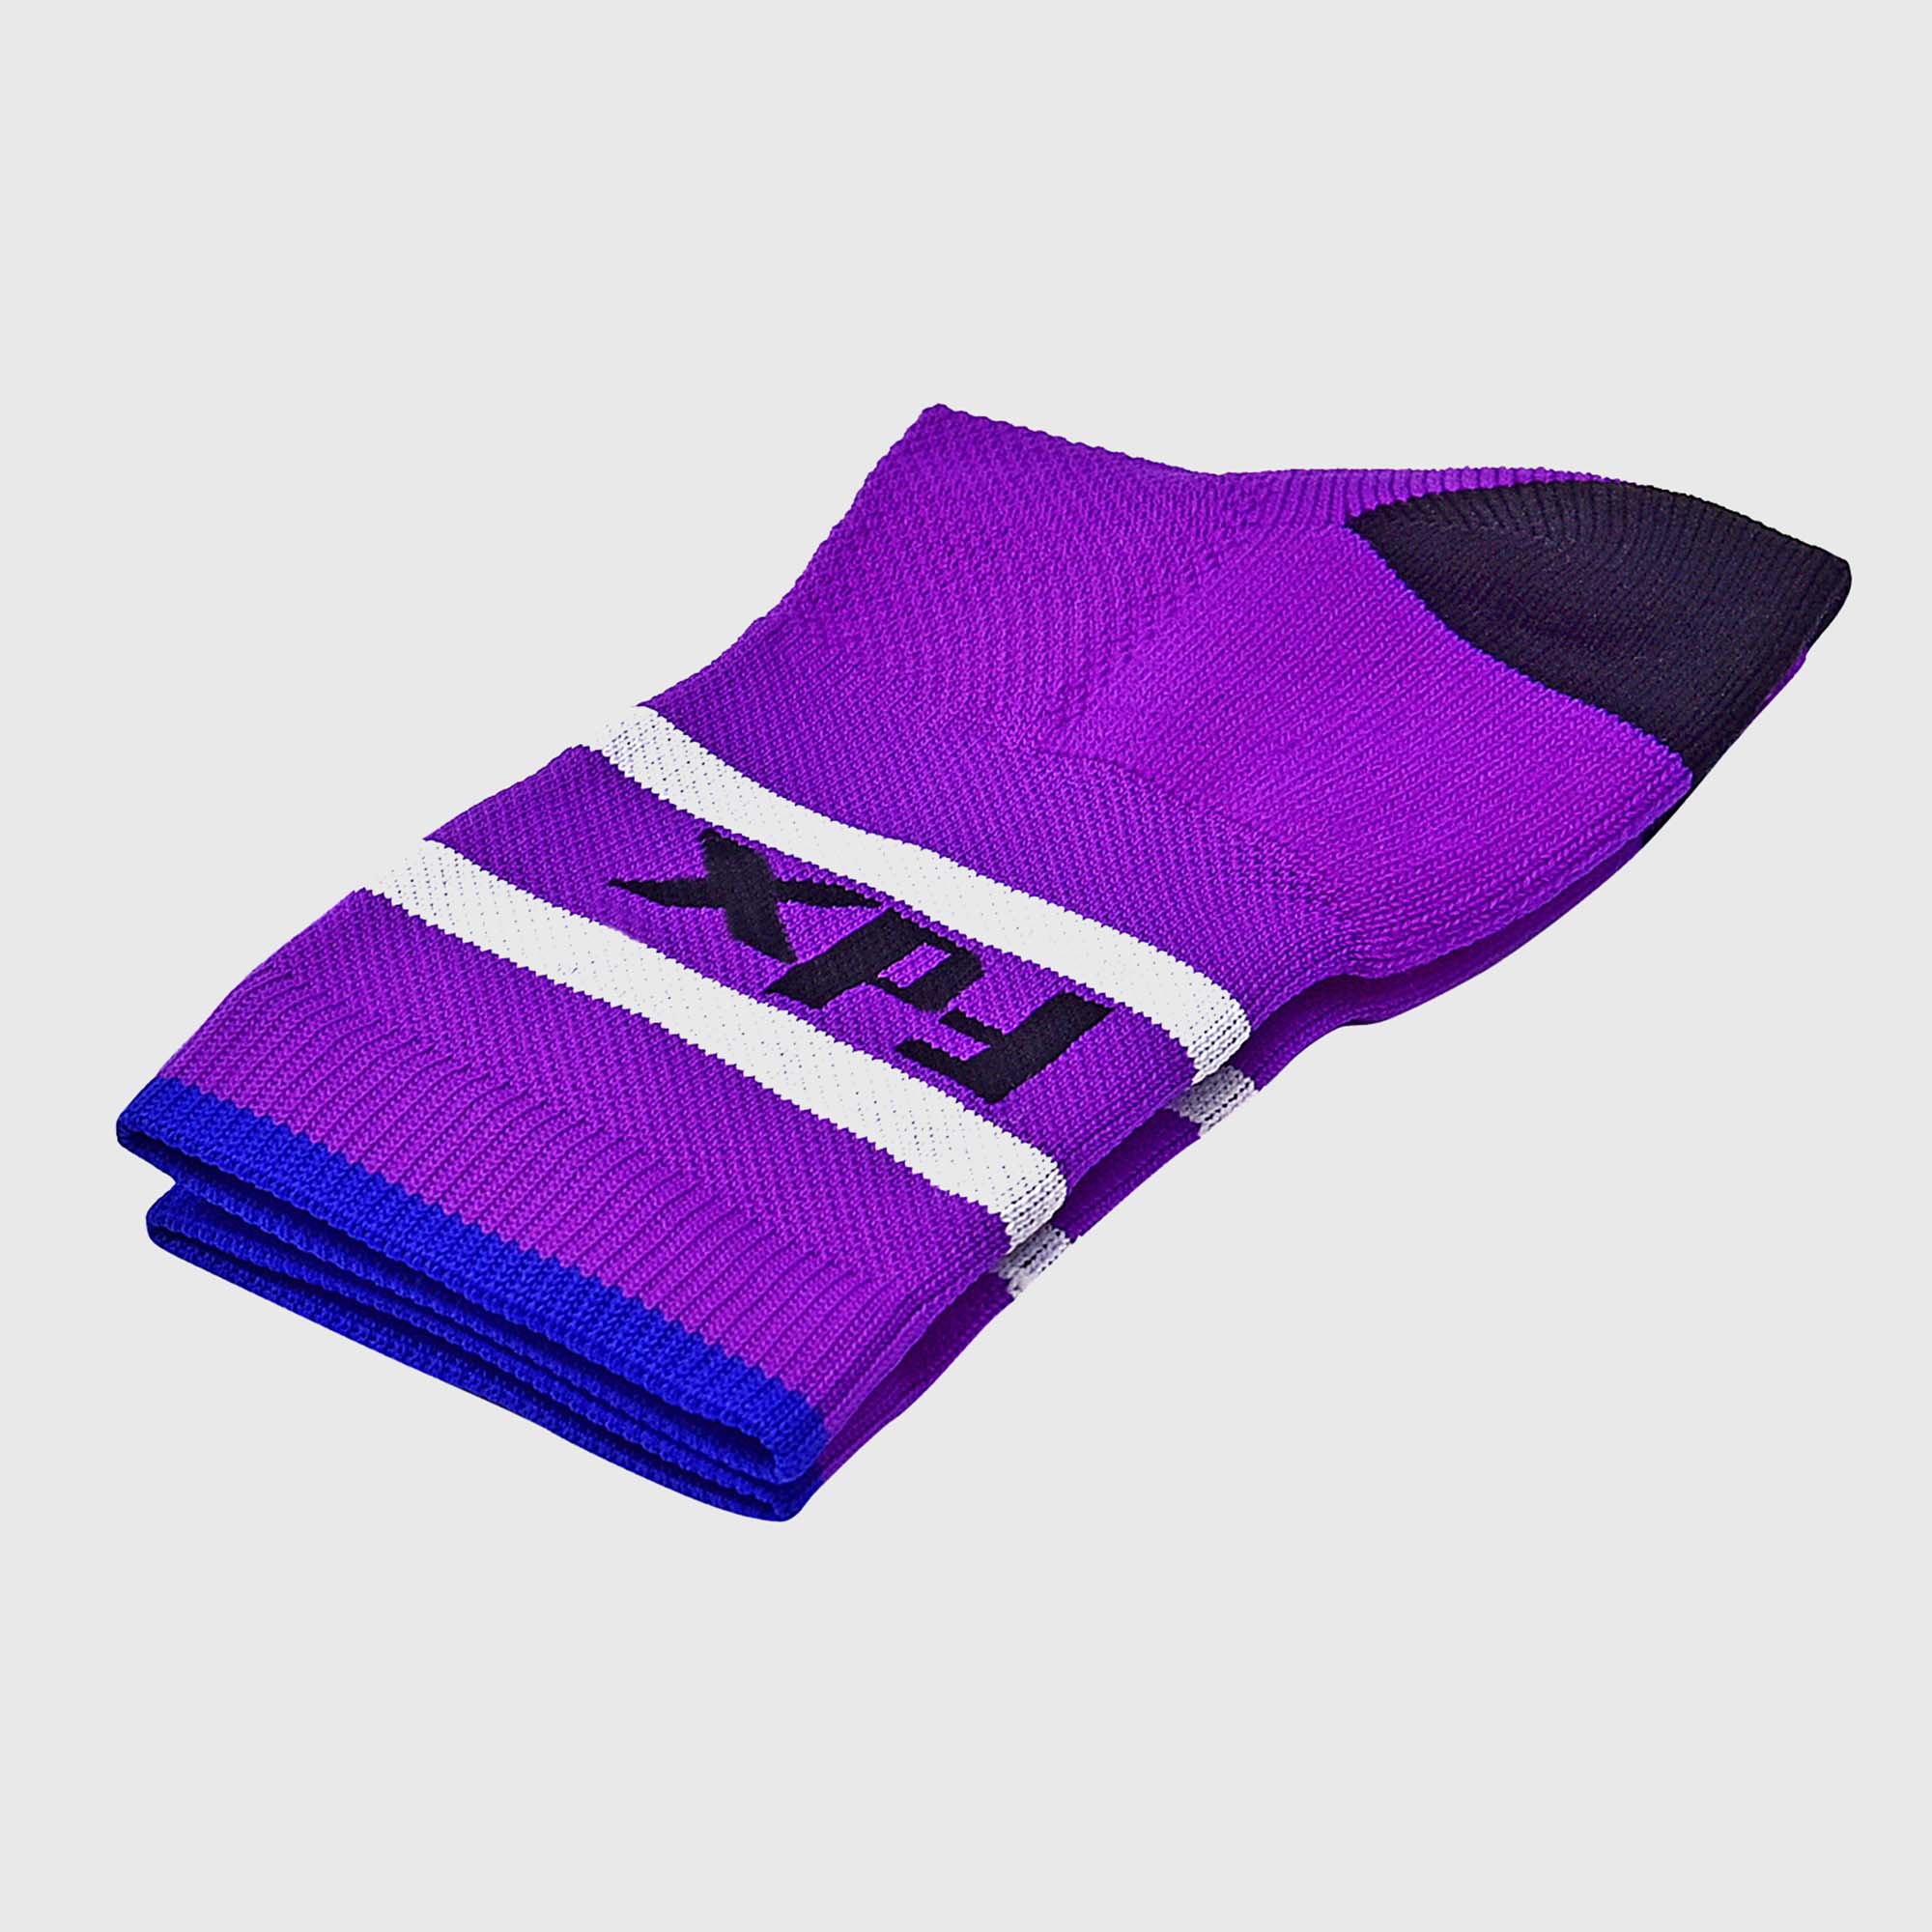 FDX Purple Compression Socks Cycling - Breathable Seamless Toe Seams Athletic Sports Socks for Running, Walking, Work, Hiking, and Flight Travel